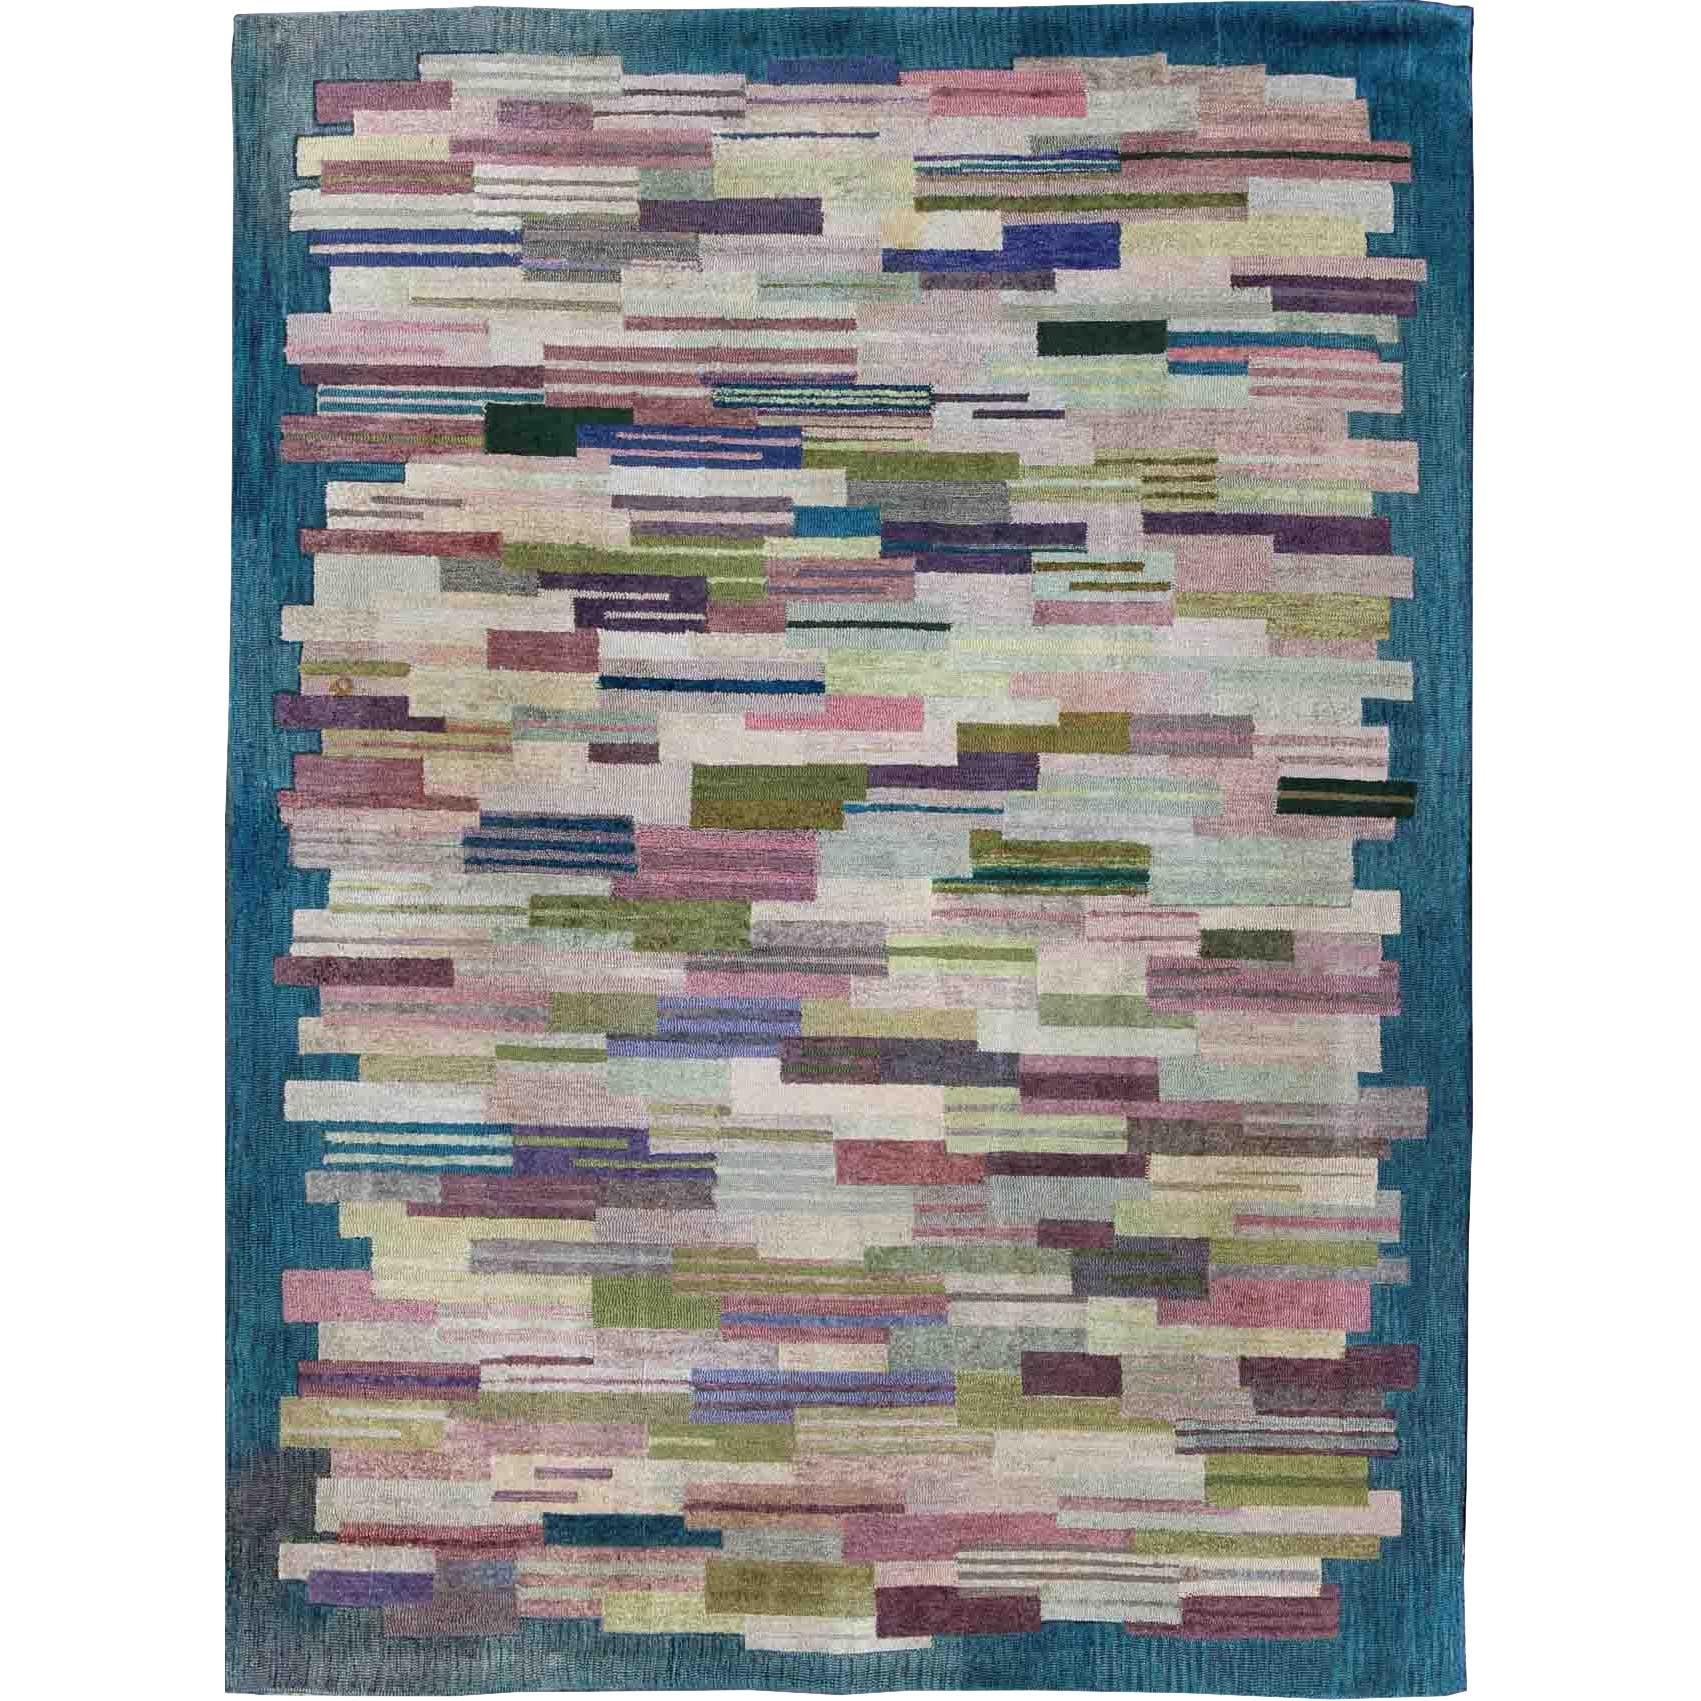 Large American Hooked Rug by George Wells with a Modern Design and Modern Colors For Sale